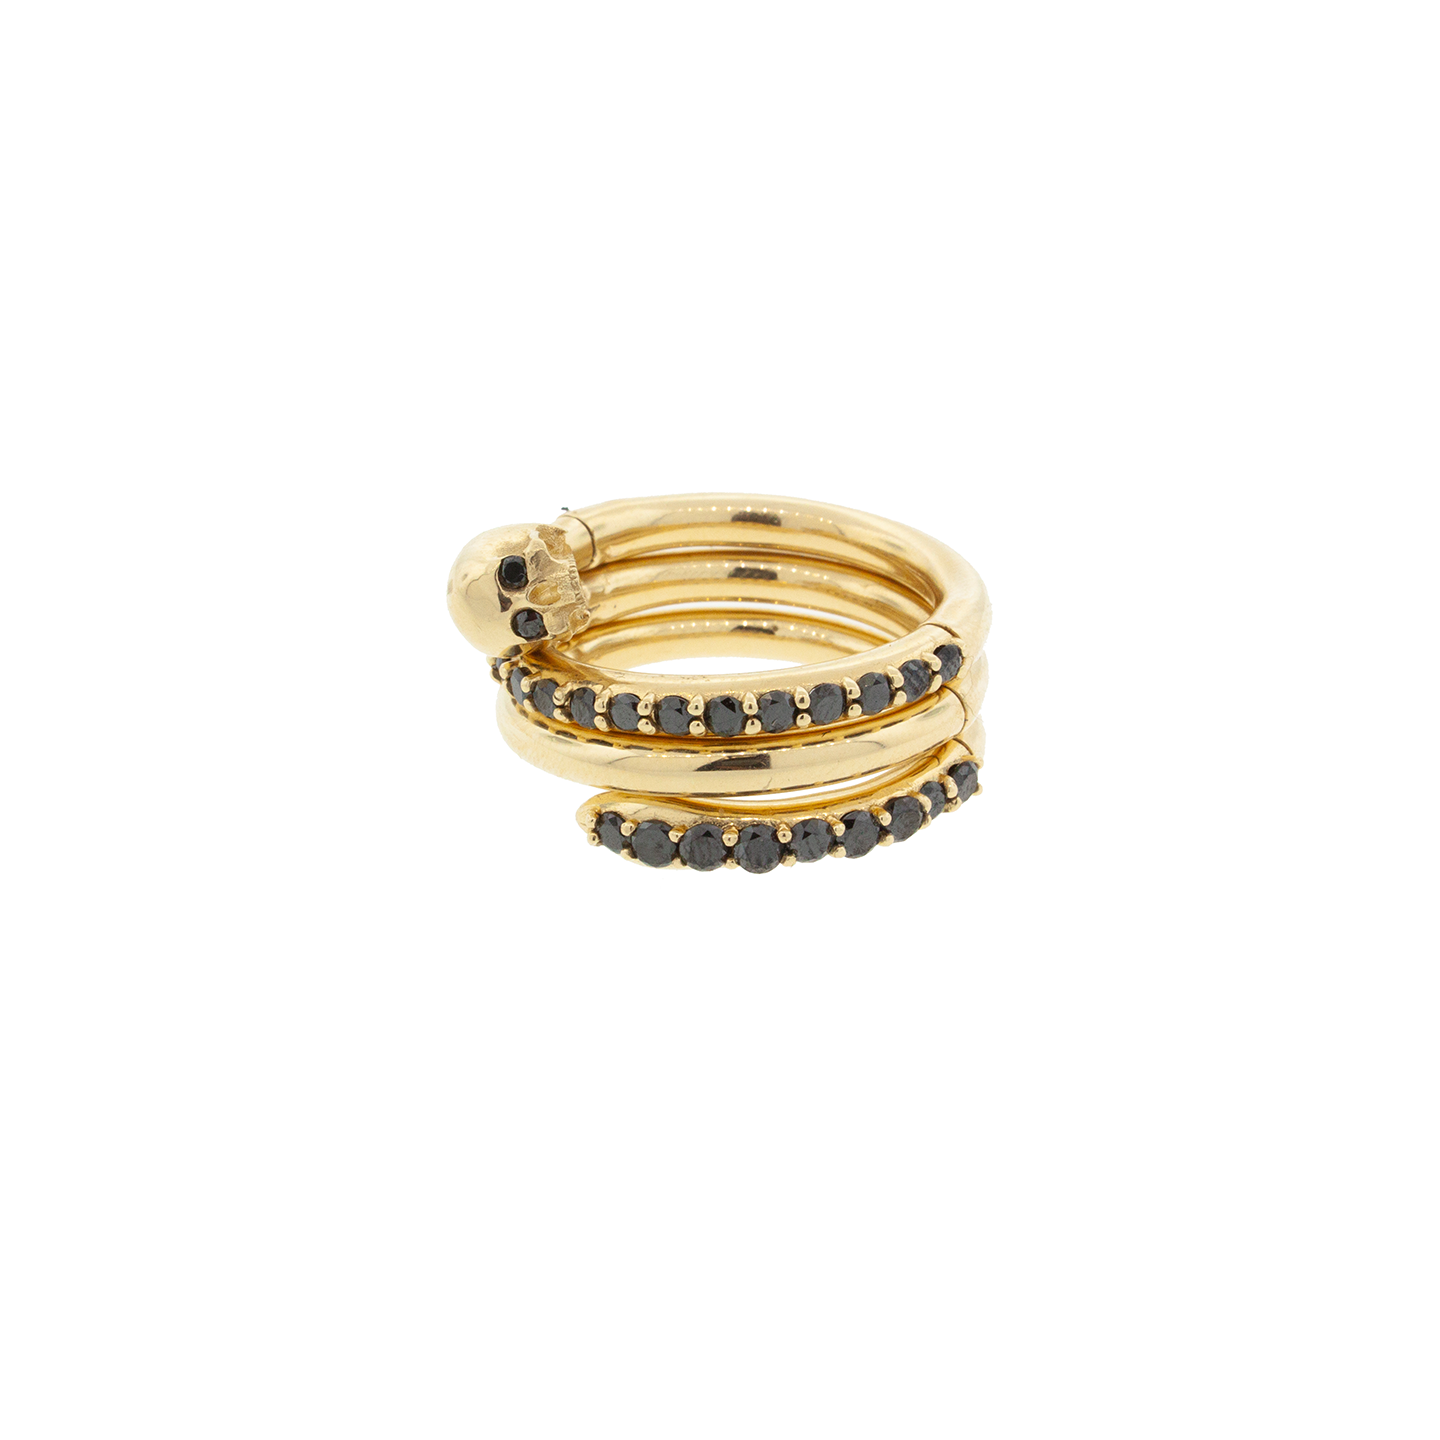 Luis Morais Gold Serpentine Ring with Skull End and Black Diamonds